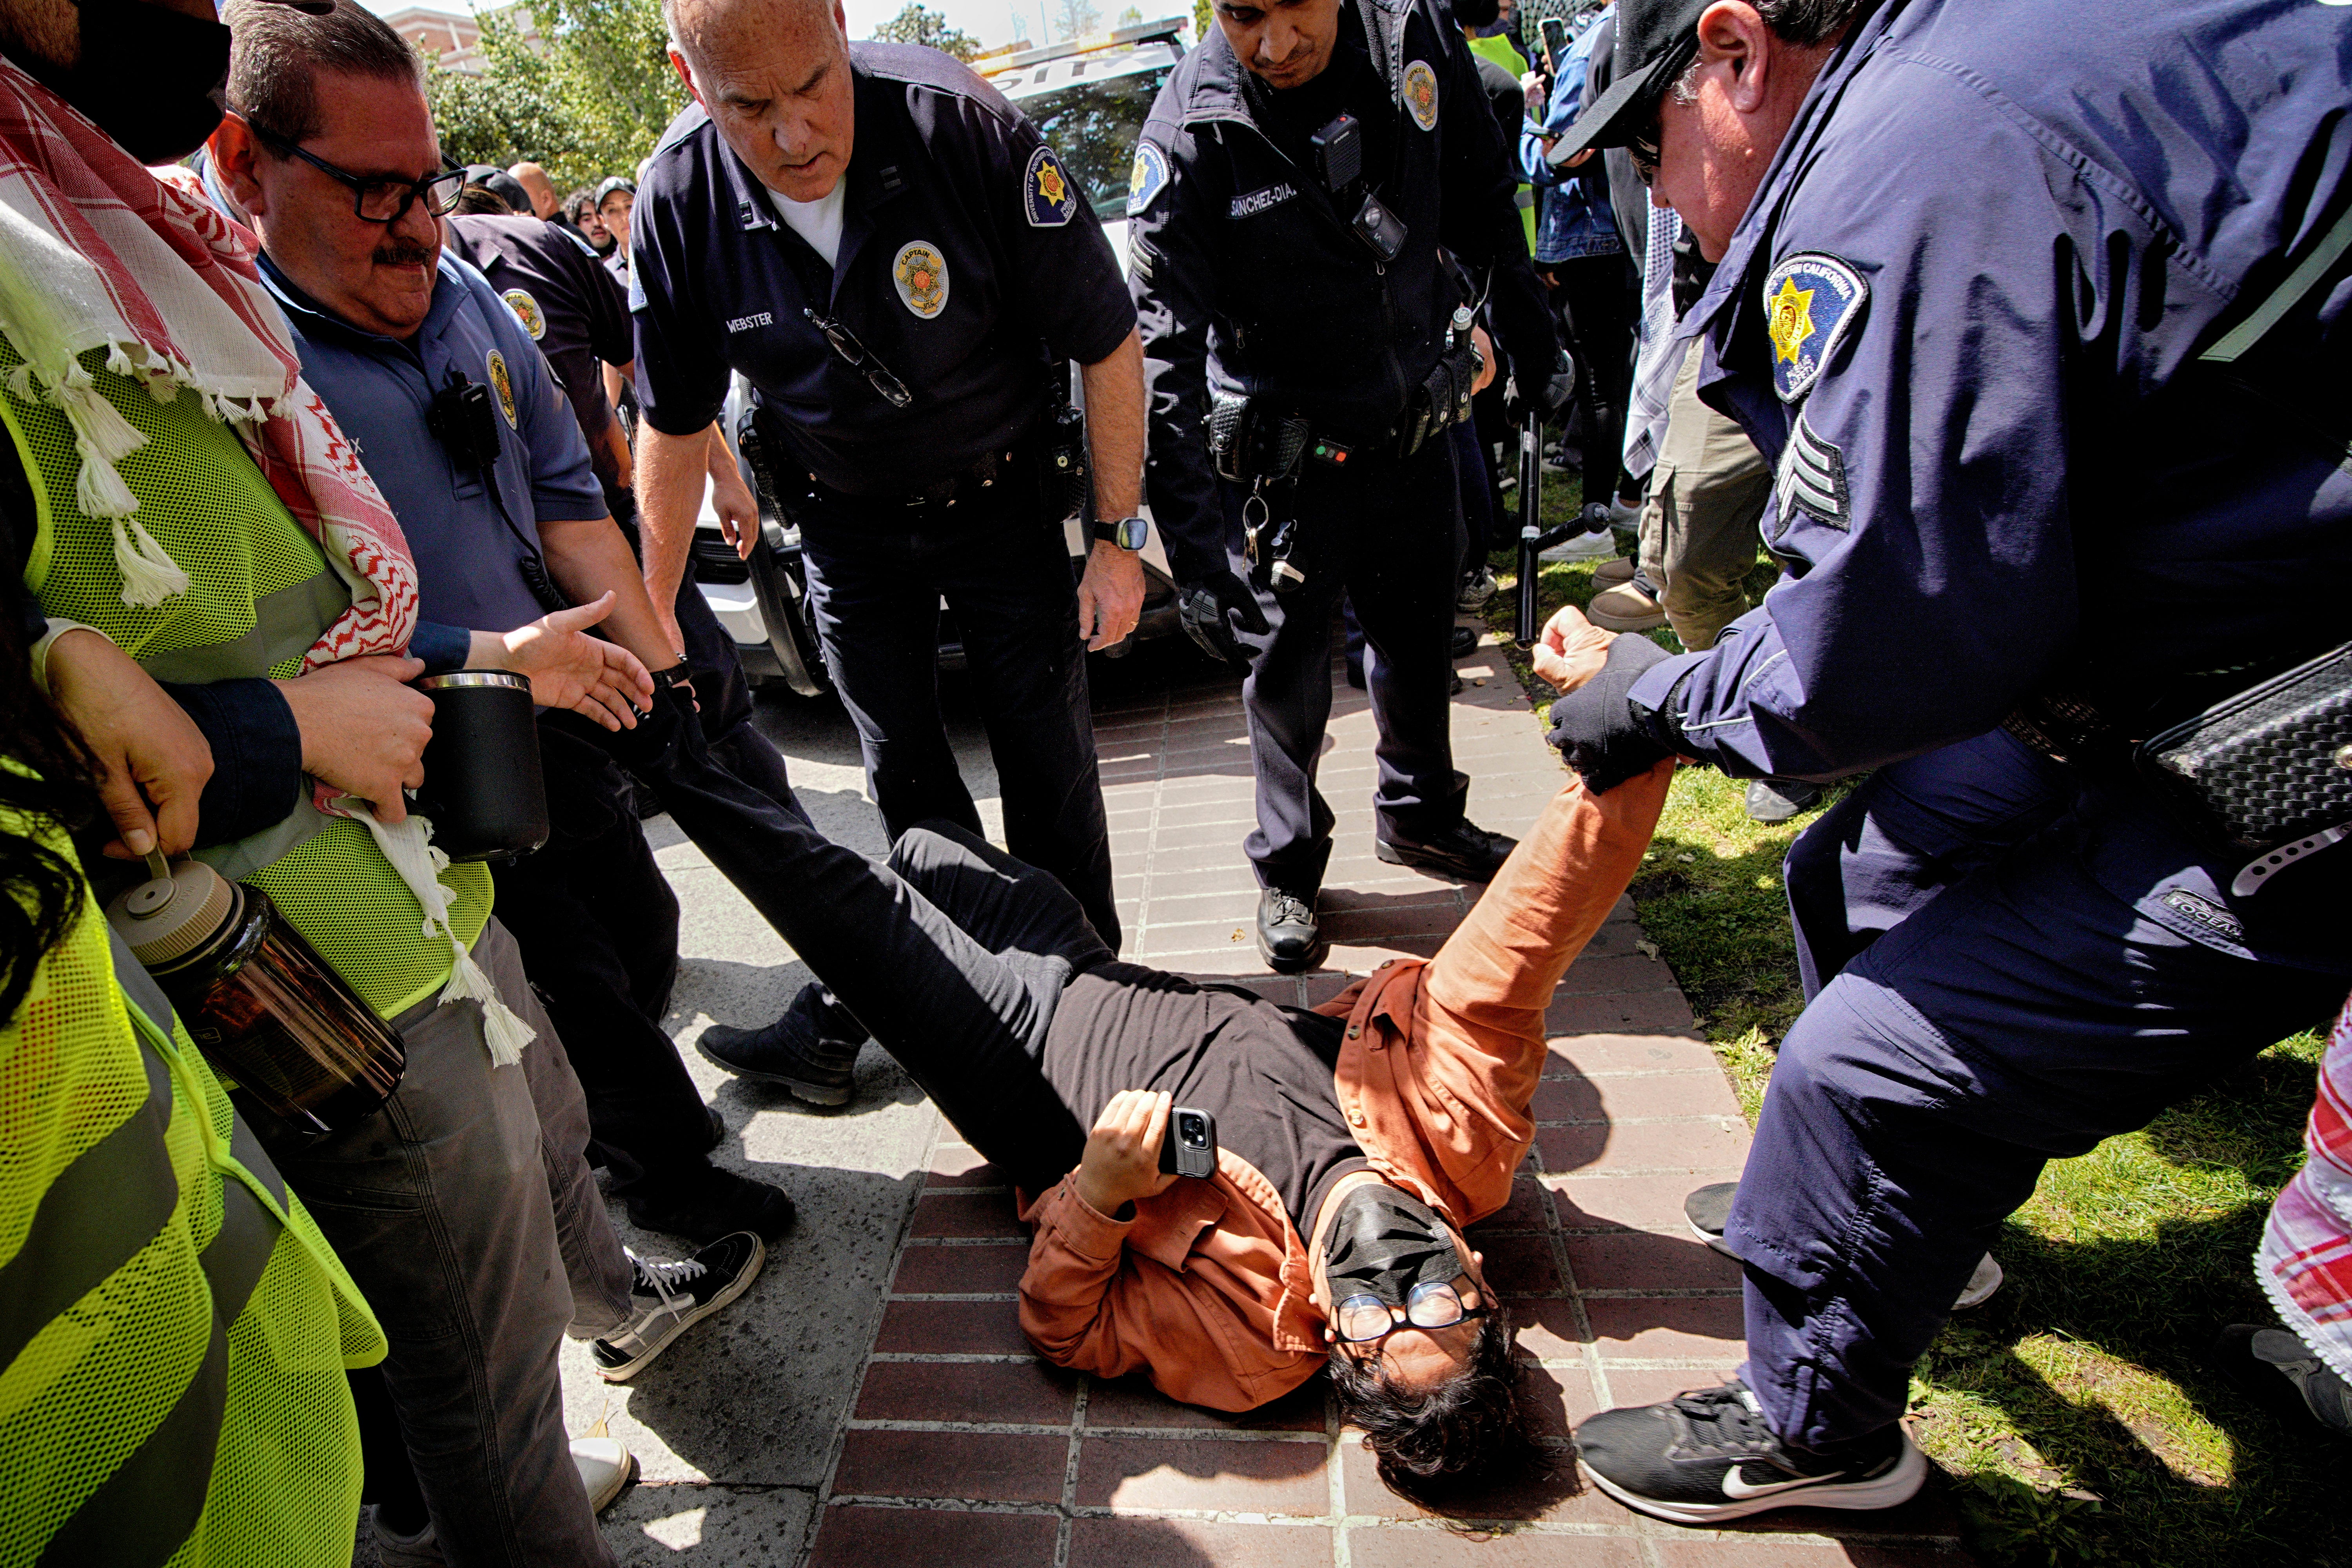 A protester at the University of Southern California is detained during pro-Gaza demonstrations